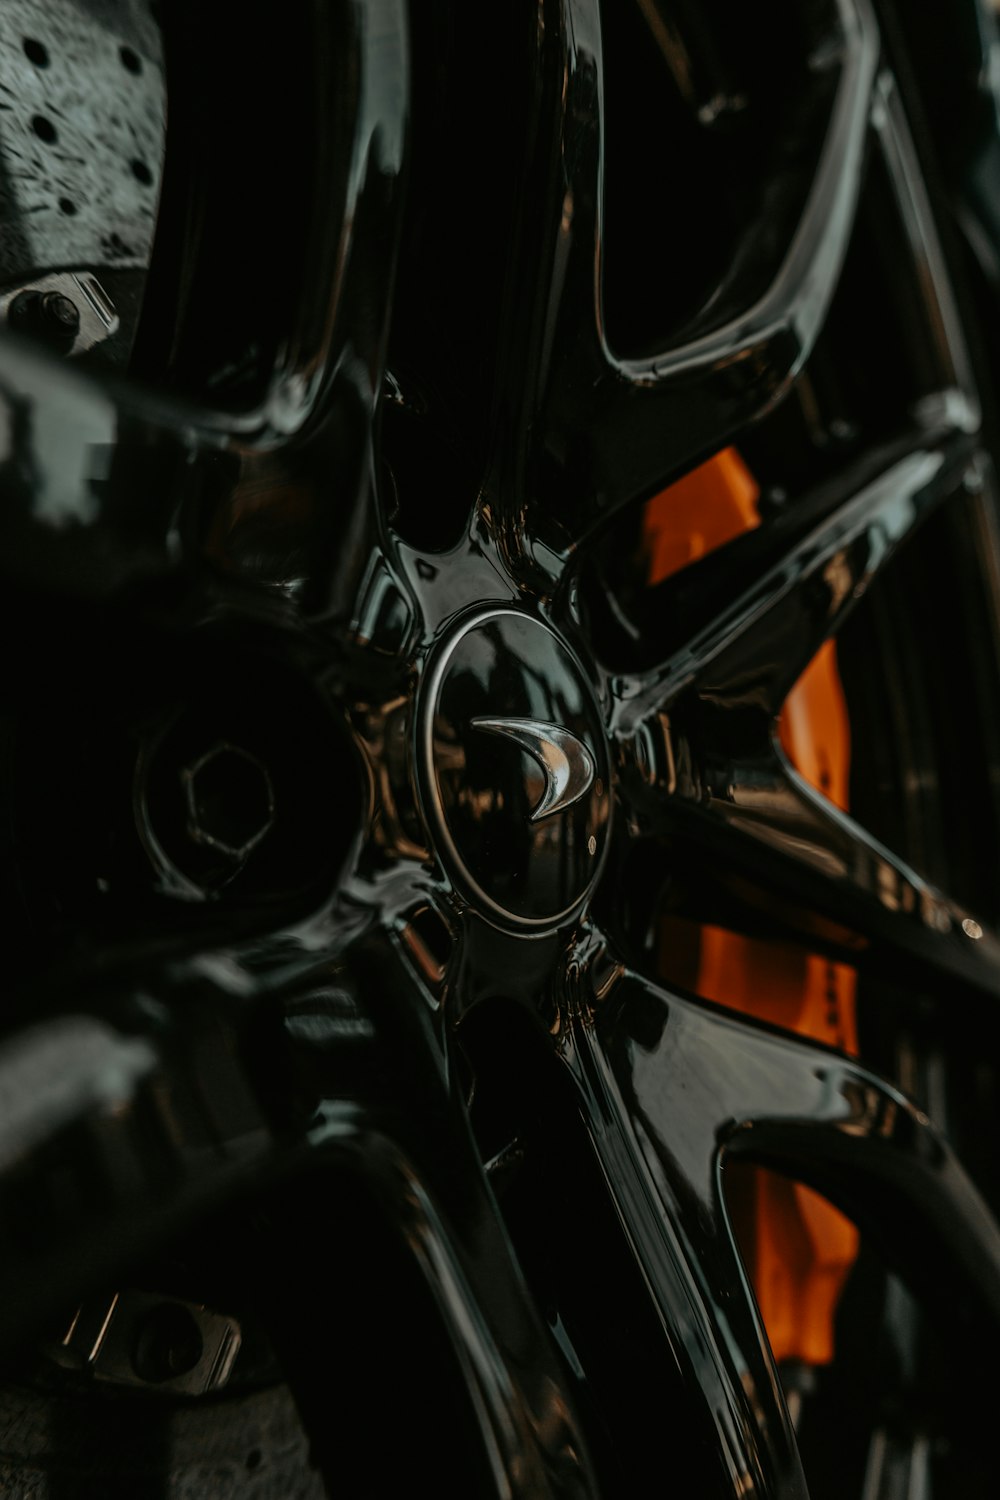 a close up of a black and orange wheel